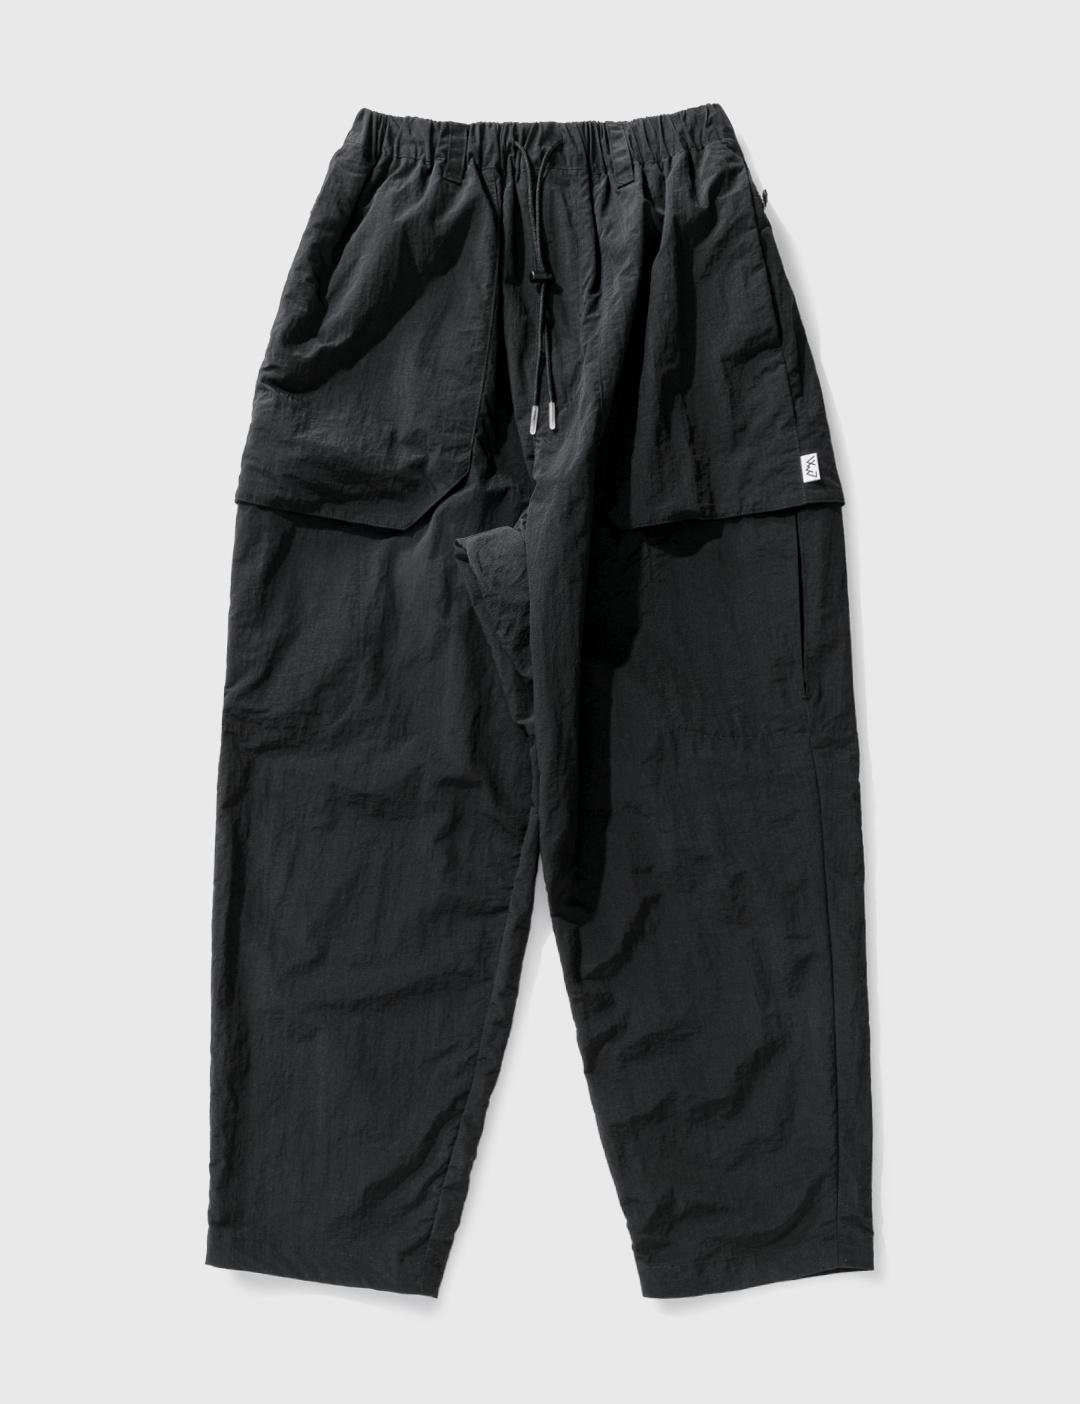 UTIL NYLON PANTS by COMFY OUTDOOR GARMENT